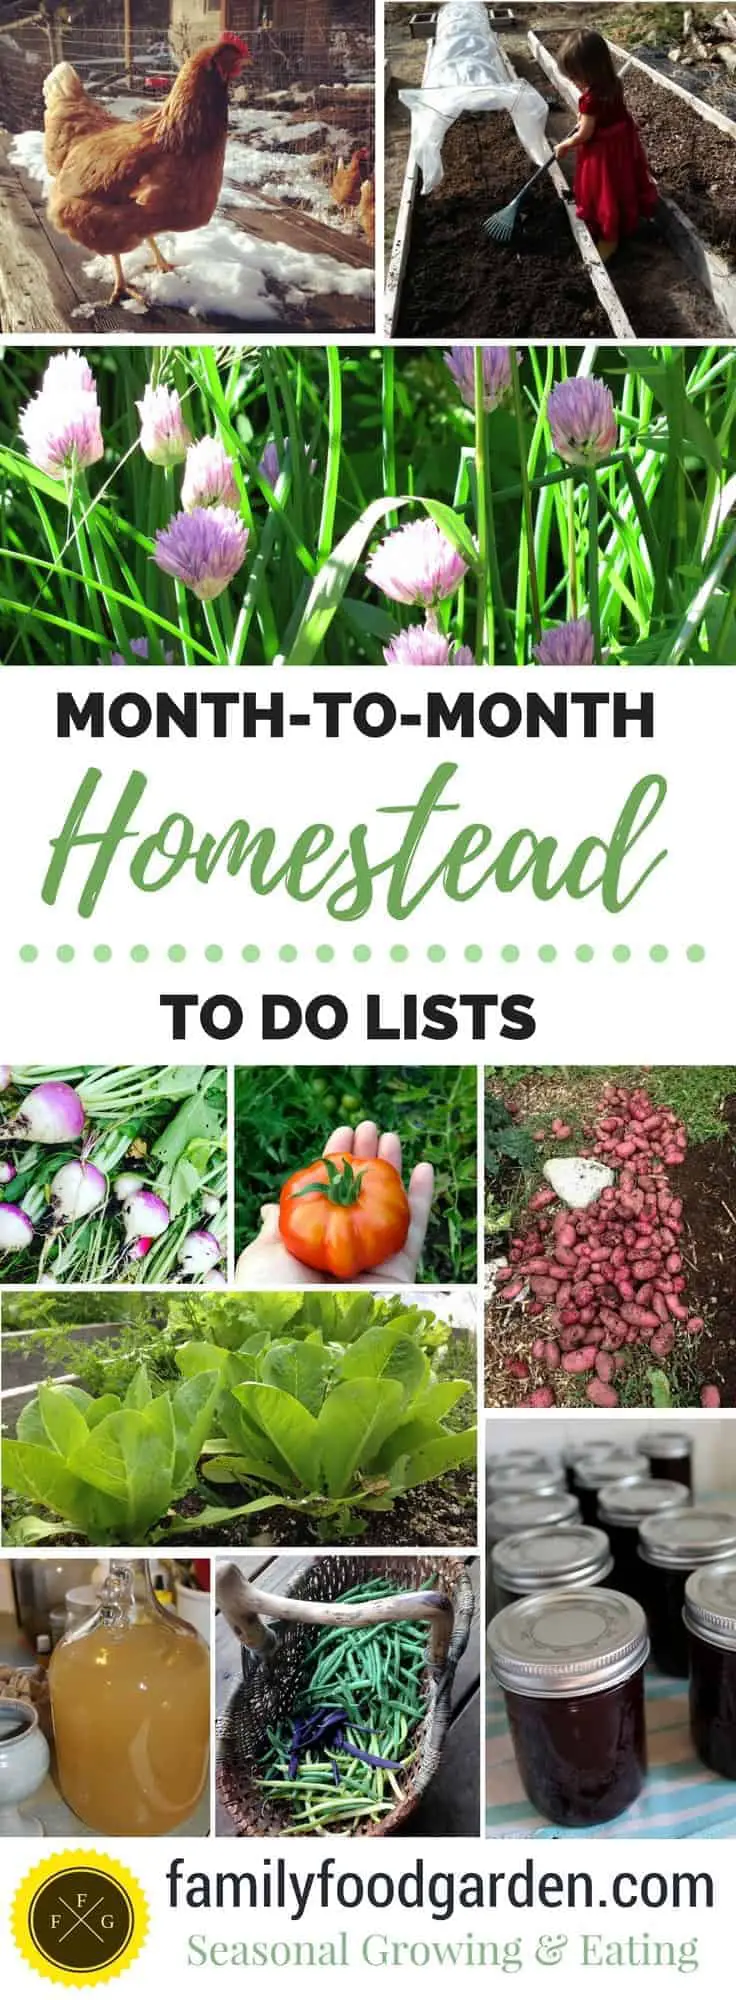 Homesteading monthly to do lists